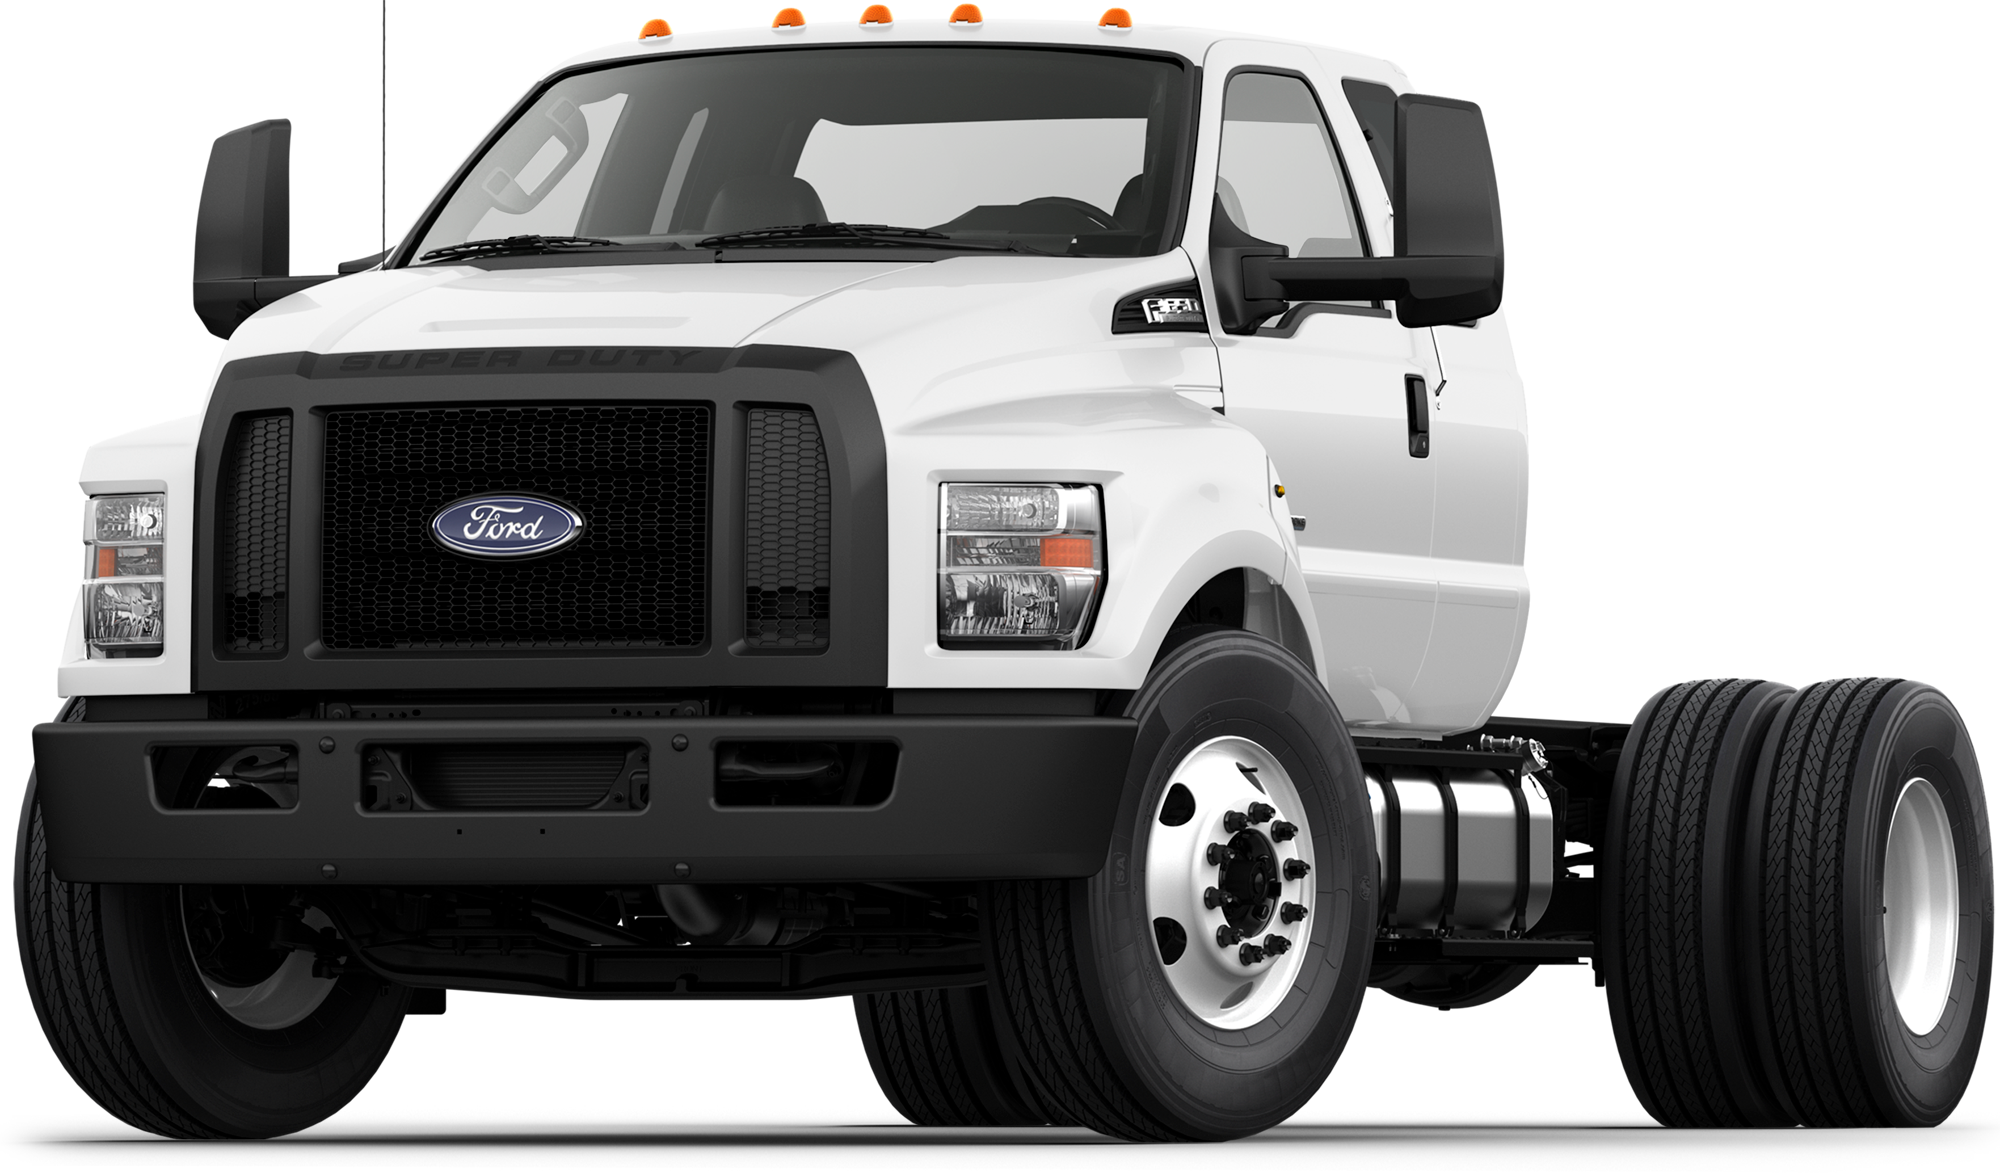 2022 Ford F650 Diesel Incentives, Specials & Offers in Madera CA